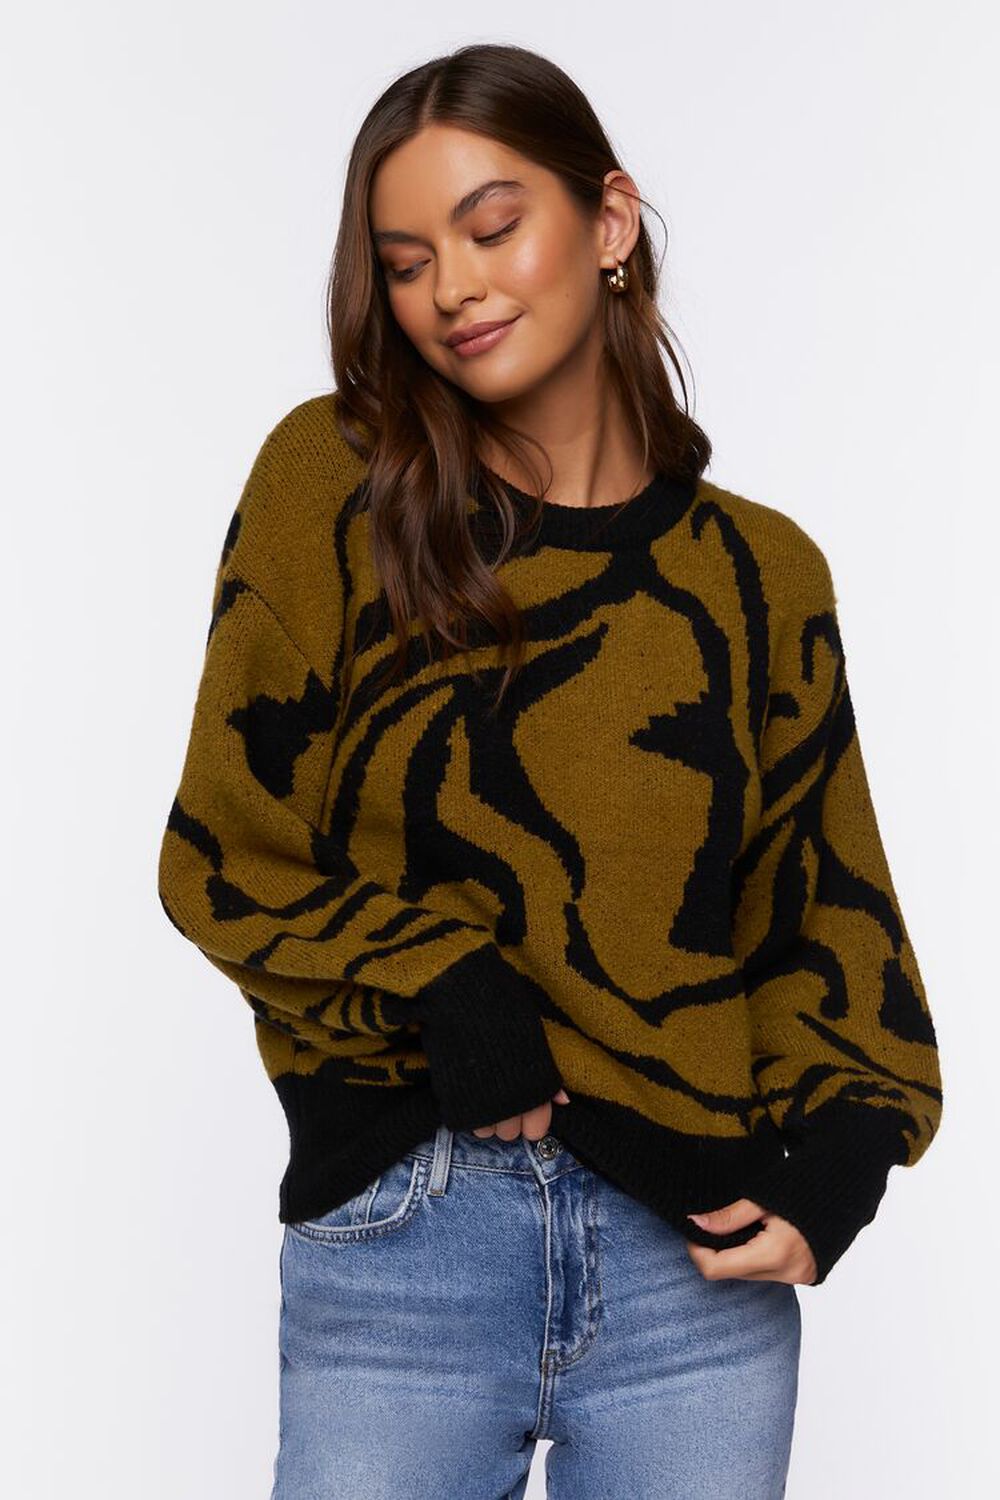 BLACK/CAMEL Abstract Striped Sweater, image 2